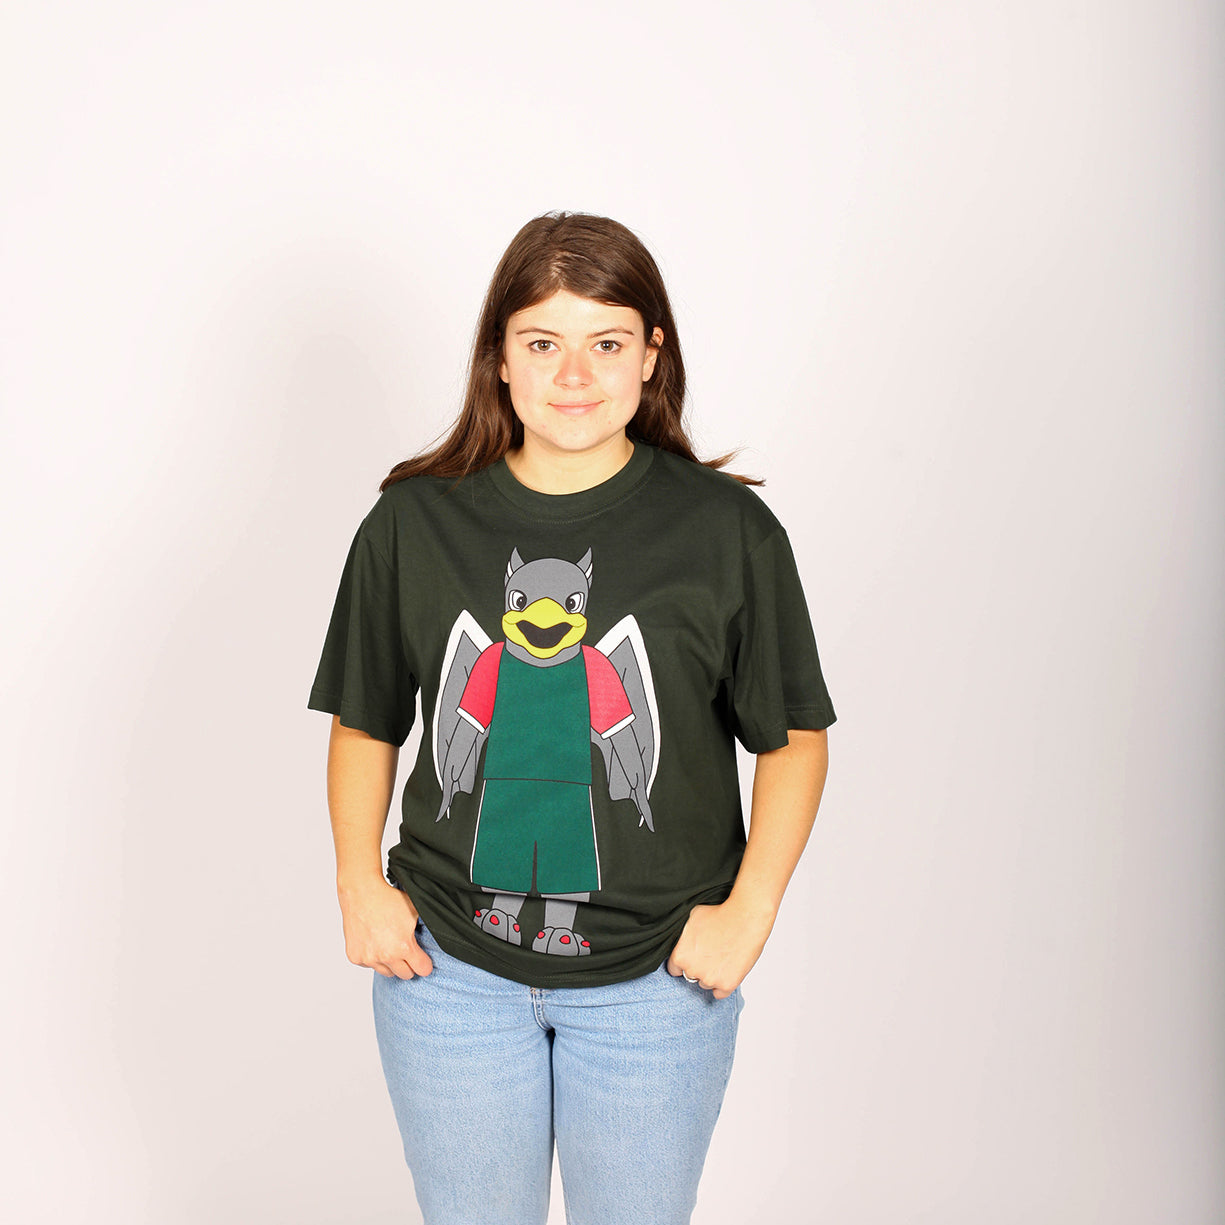 George the Gryphon T-Shirt